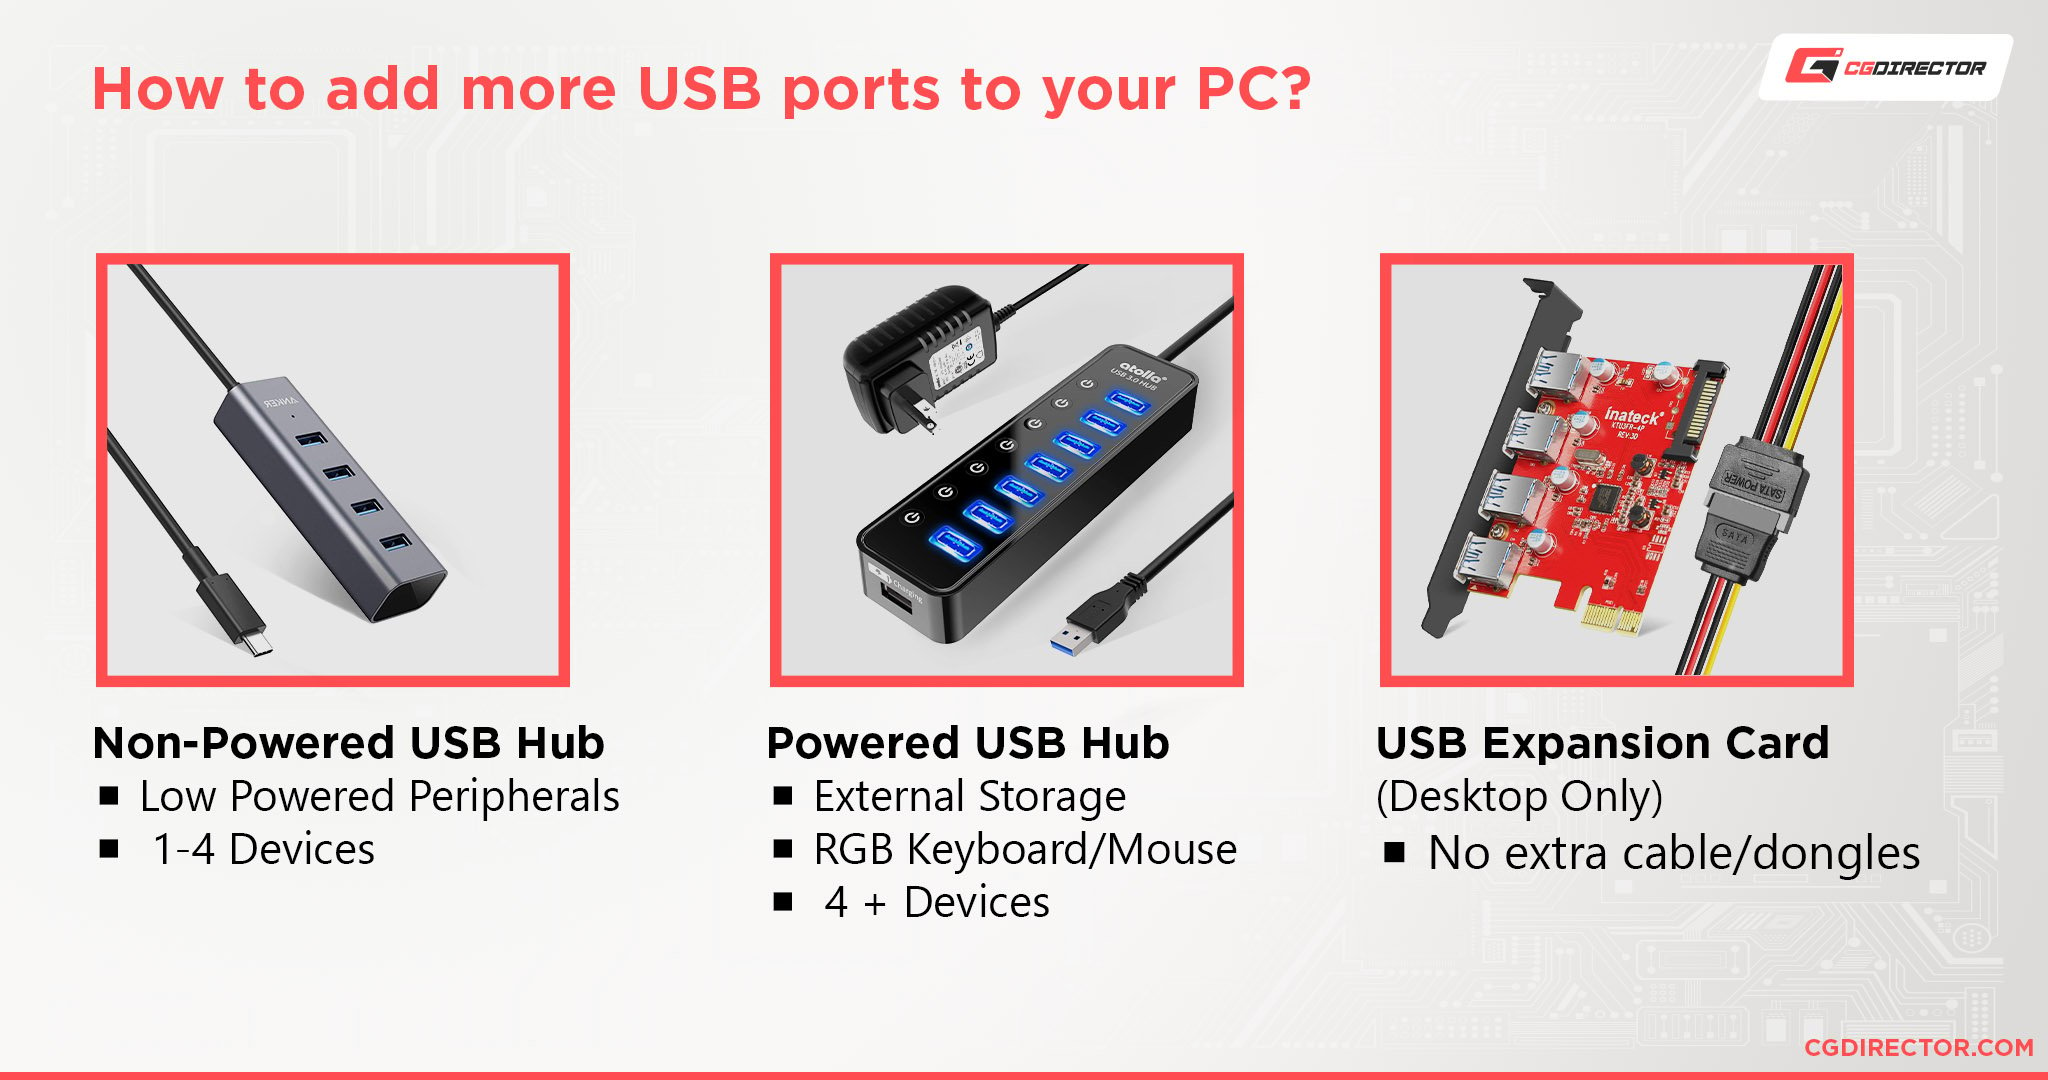 How to add more USB ports to your PC